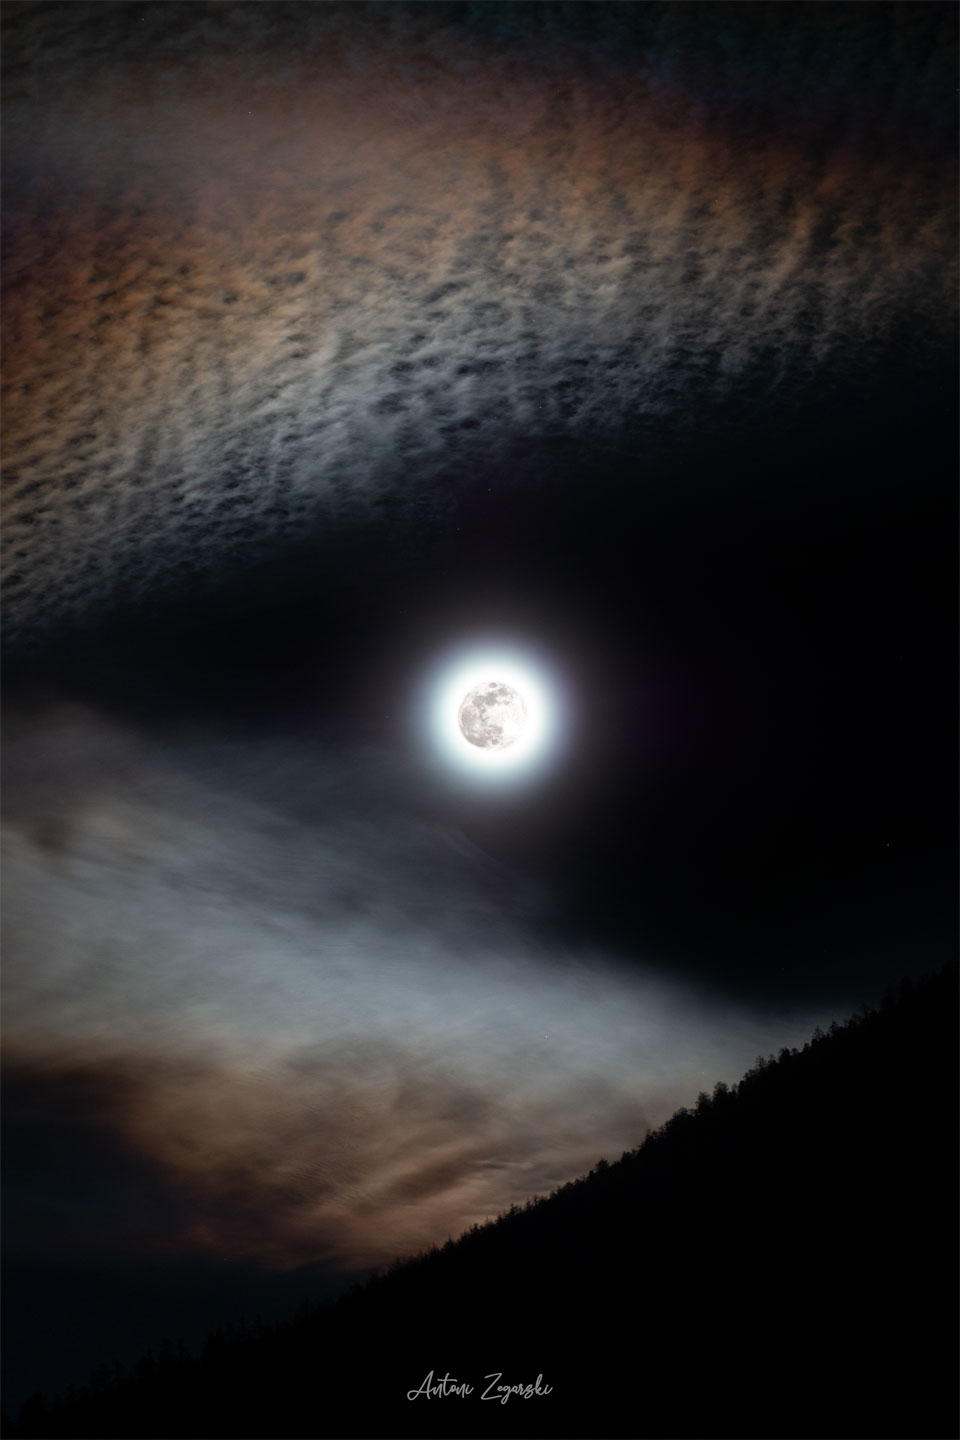 A bright full moon is seen in the center of the
image. Angular clouds are seen around the edges which
make the moon look like it is either in the mouth
of the wolf, or the eye of a wolf. 
Please see the explanation for more detailed information.